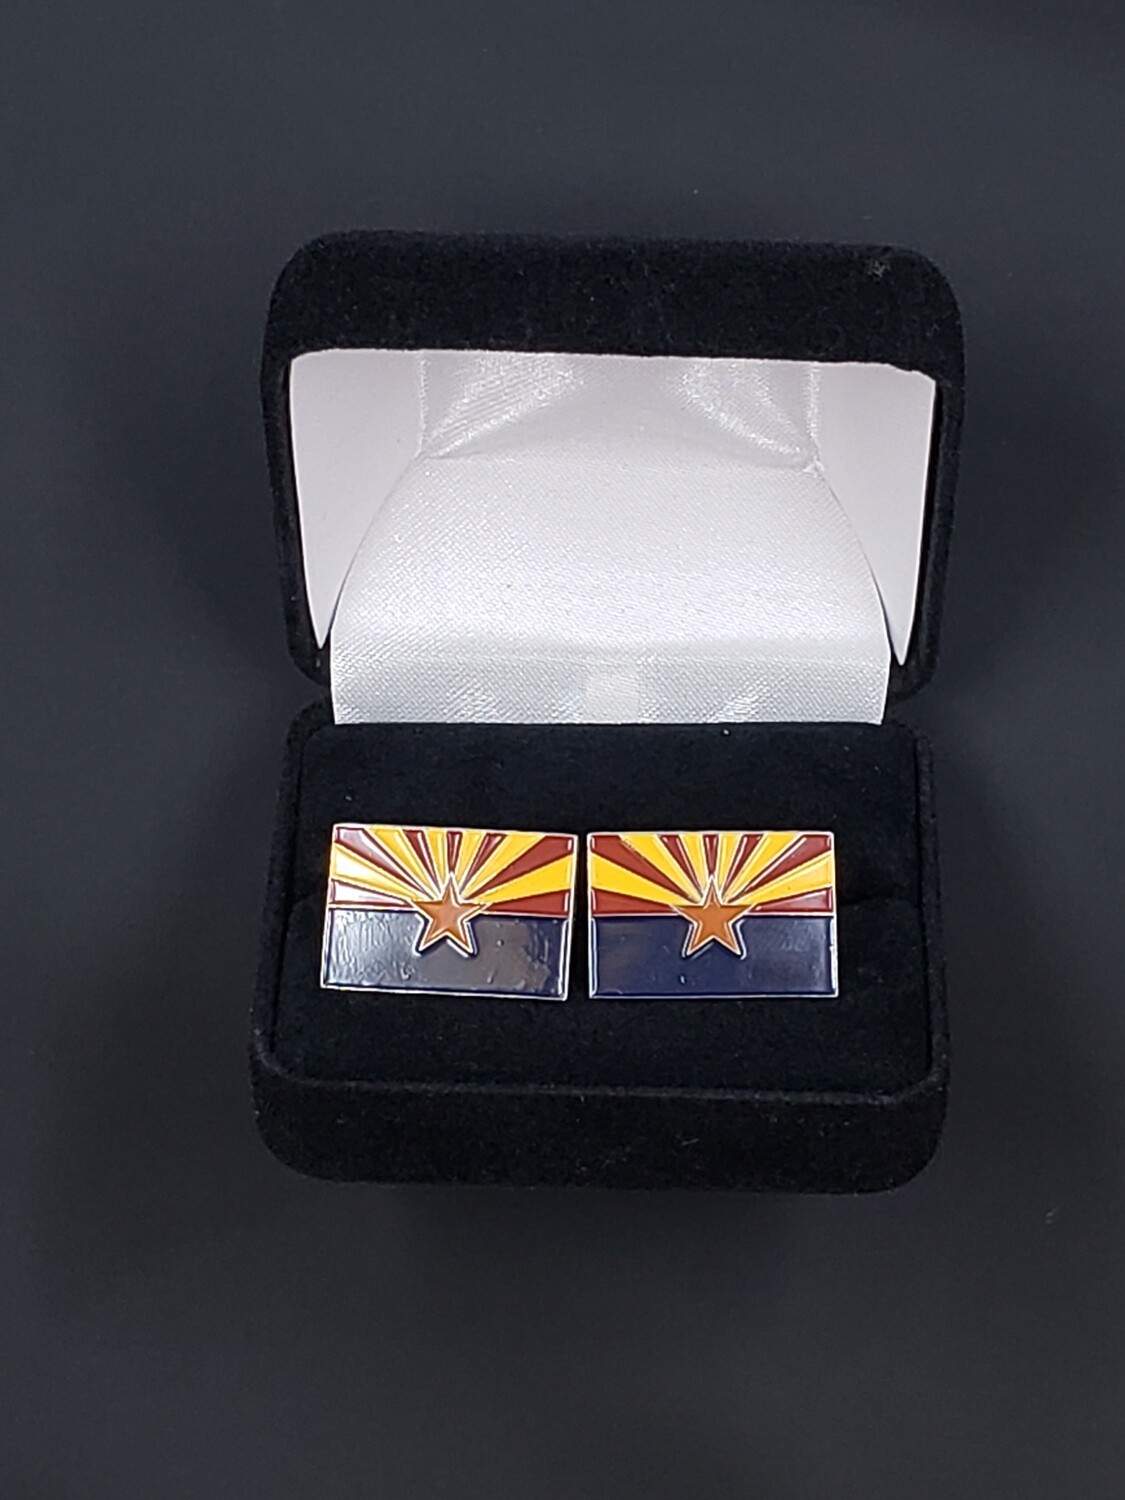 State Flag Cuff Links